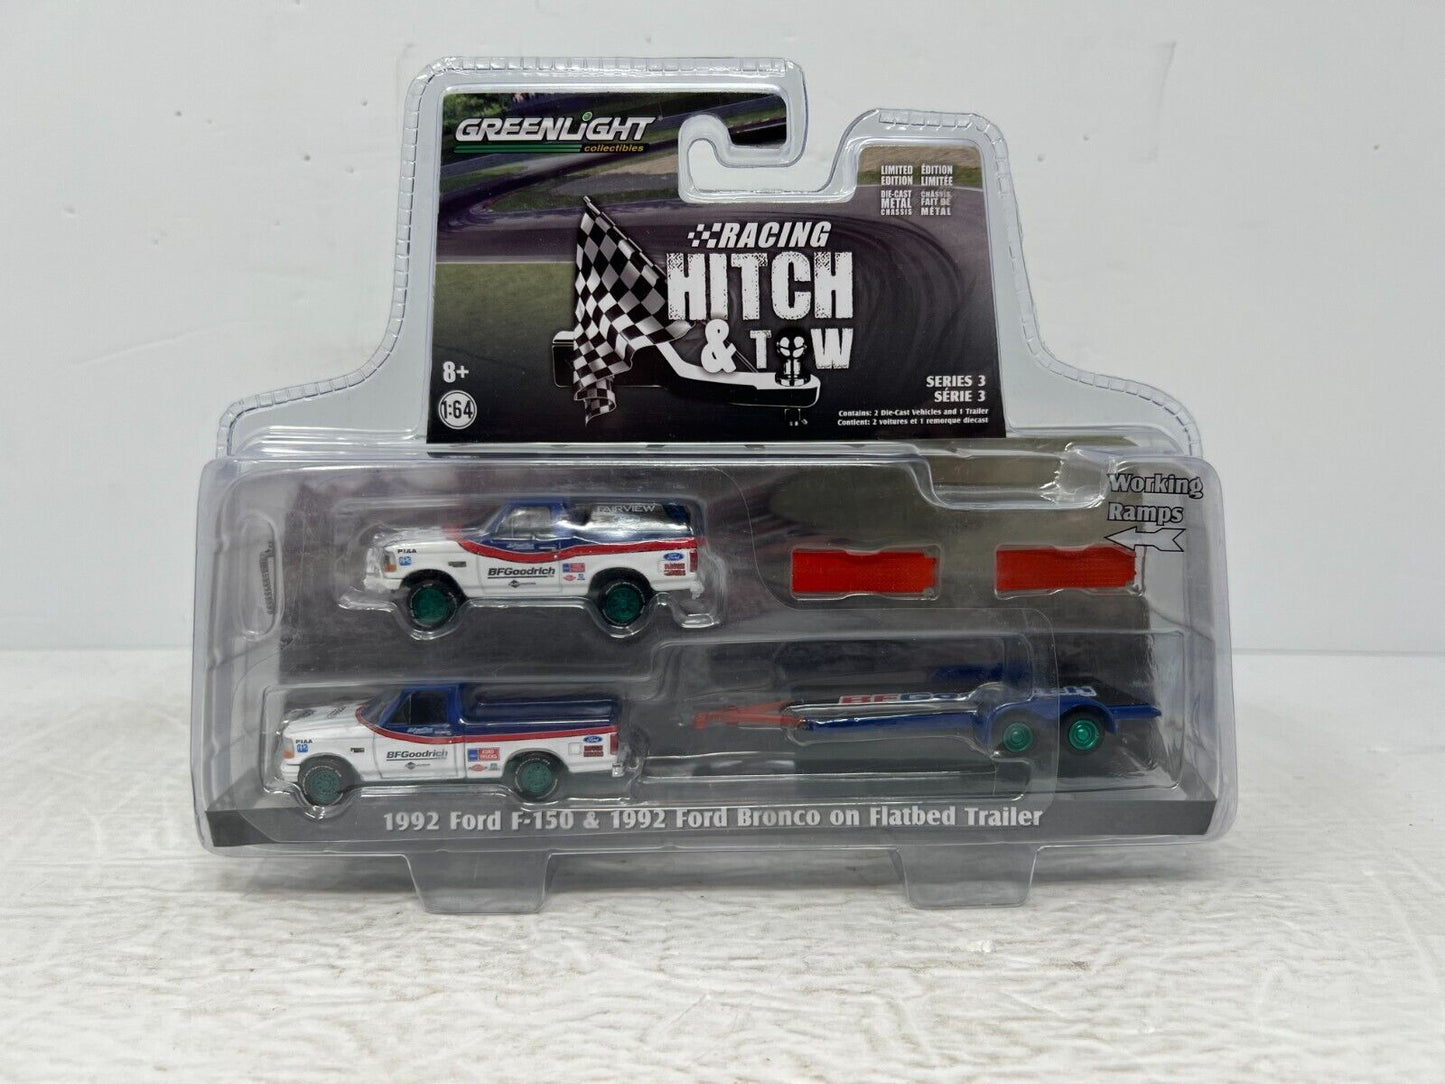 Greenlight Hitch & Tow 1992 Ford F-150 & Ford Bronco Green Machine 1:64 Diecast